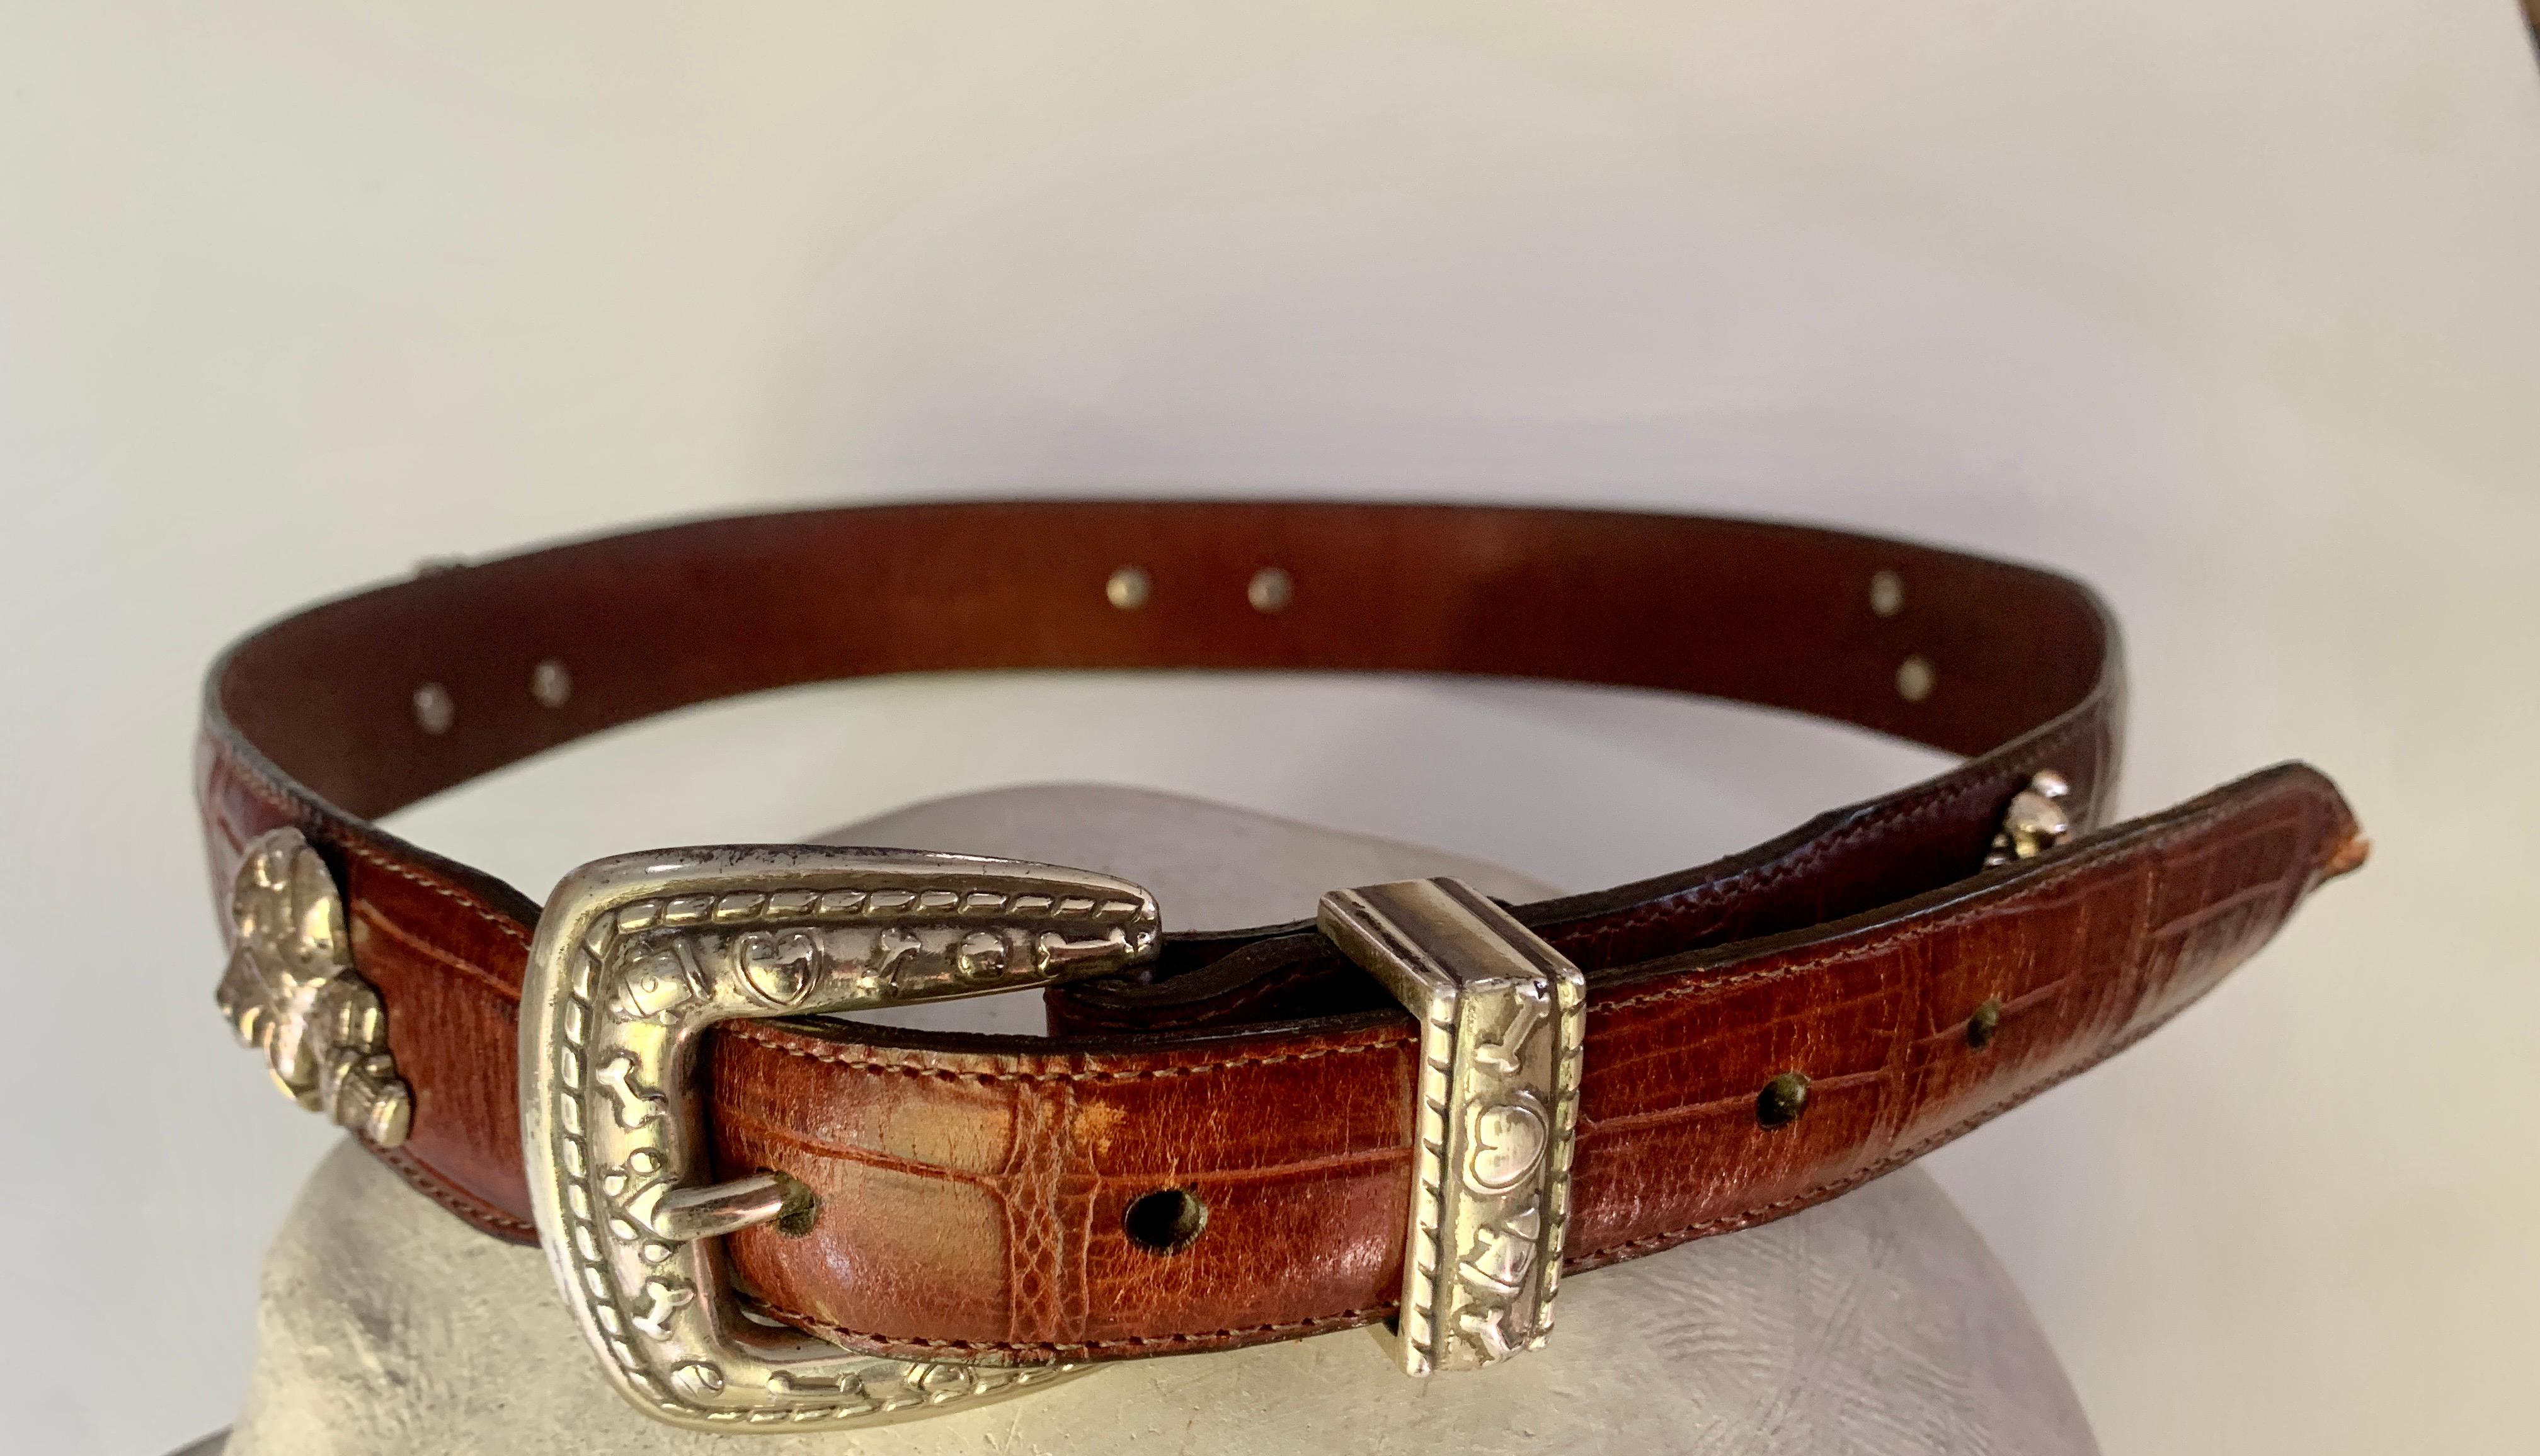 A leather embossed of Crocodile belt or dog collar - A very special piece. To be used as a belt or a collar for a large dog. We believe this piece was made as a belt, but would use it equally as well as a dog collar... the dogs spread around the